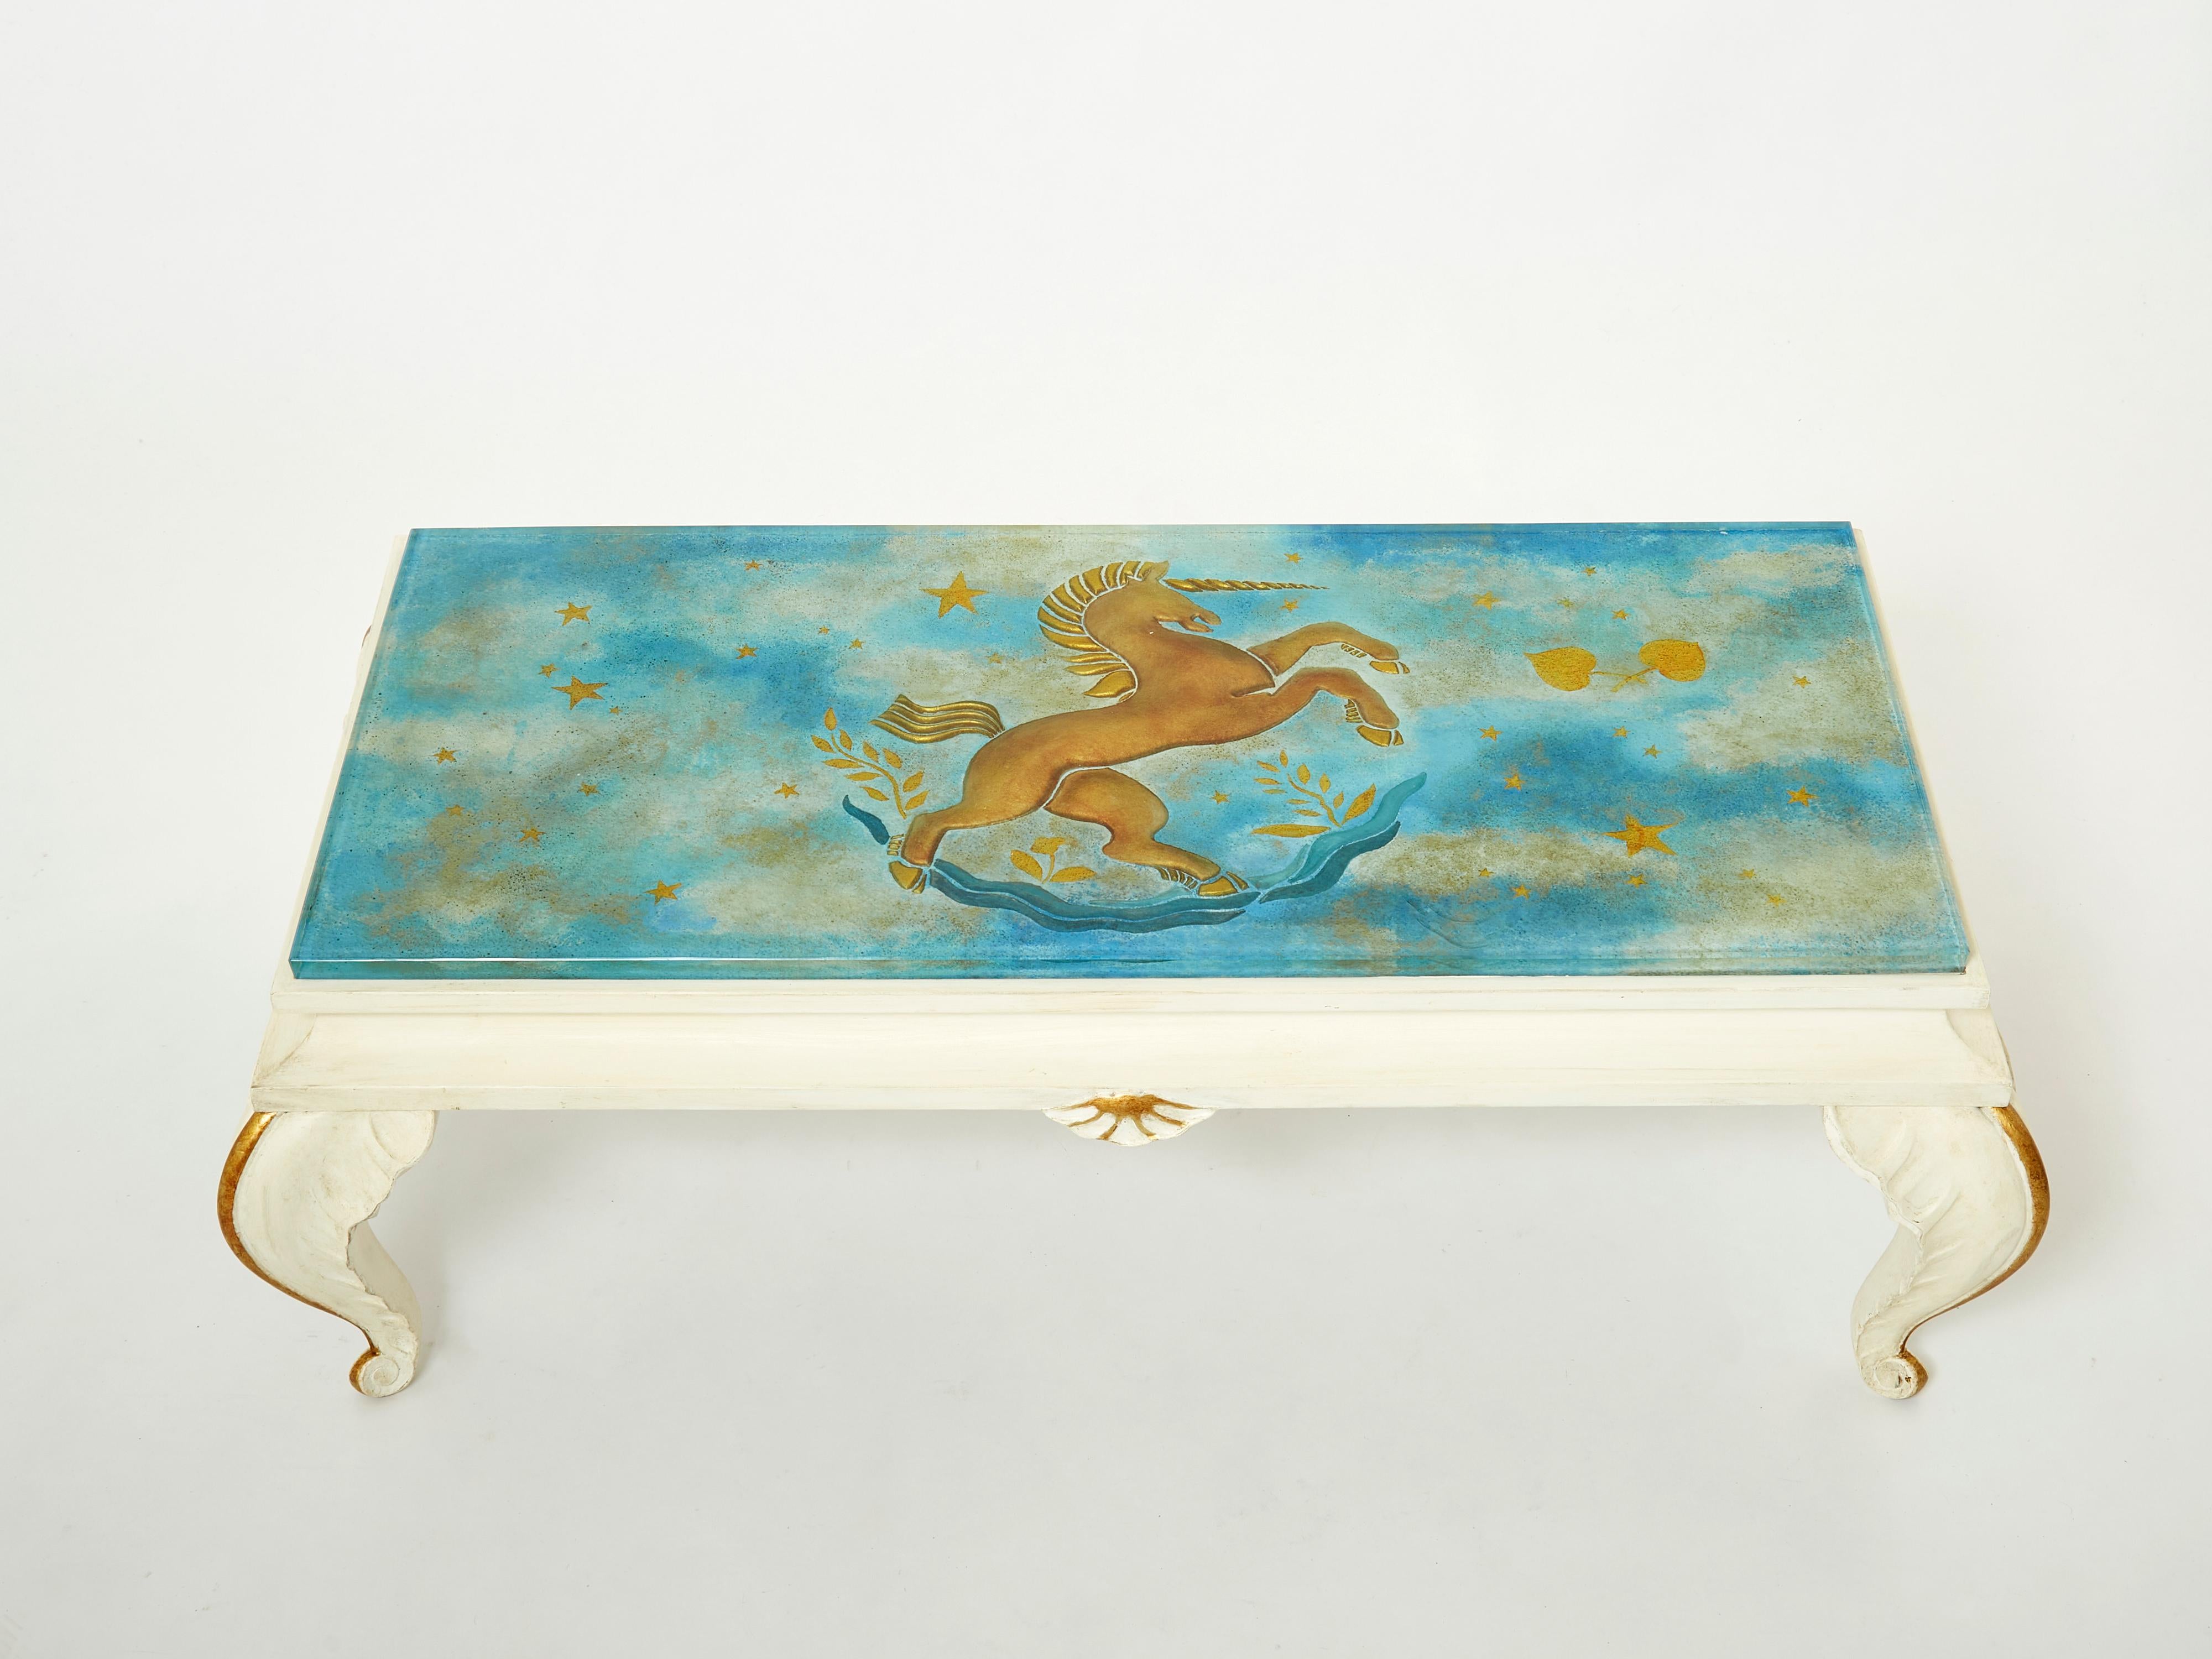 Maison Jansen Gilded Wood Painted Glass Top Coffee Table, 1950 For Sale 1